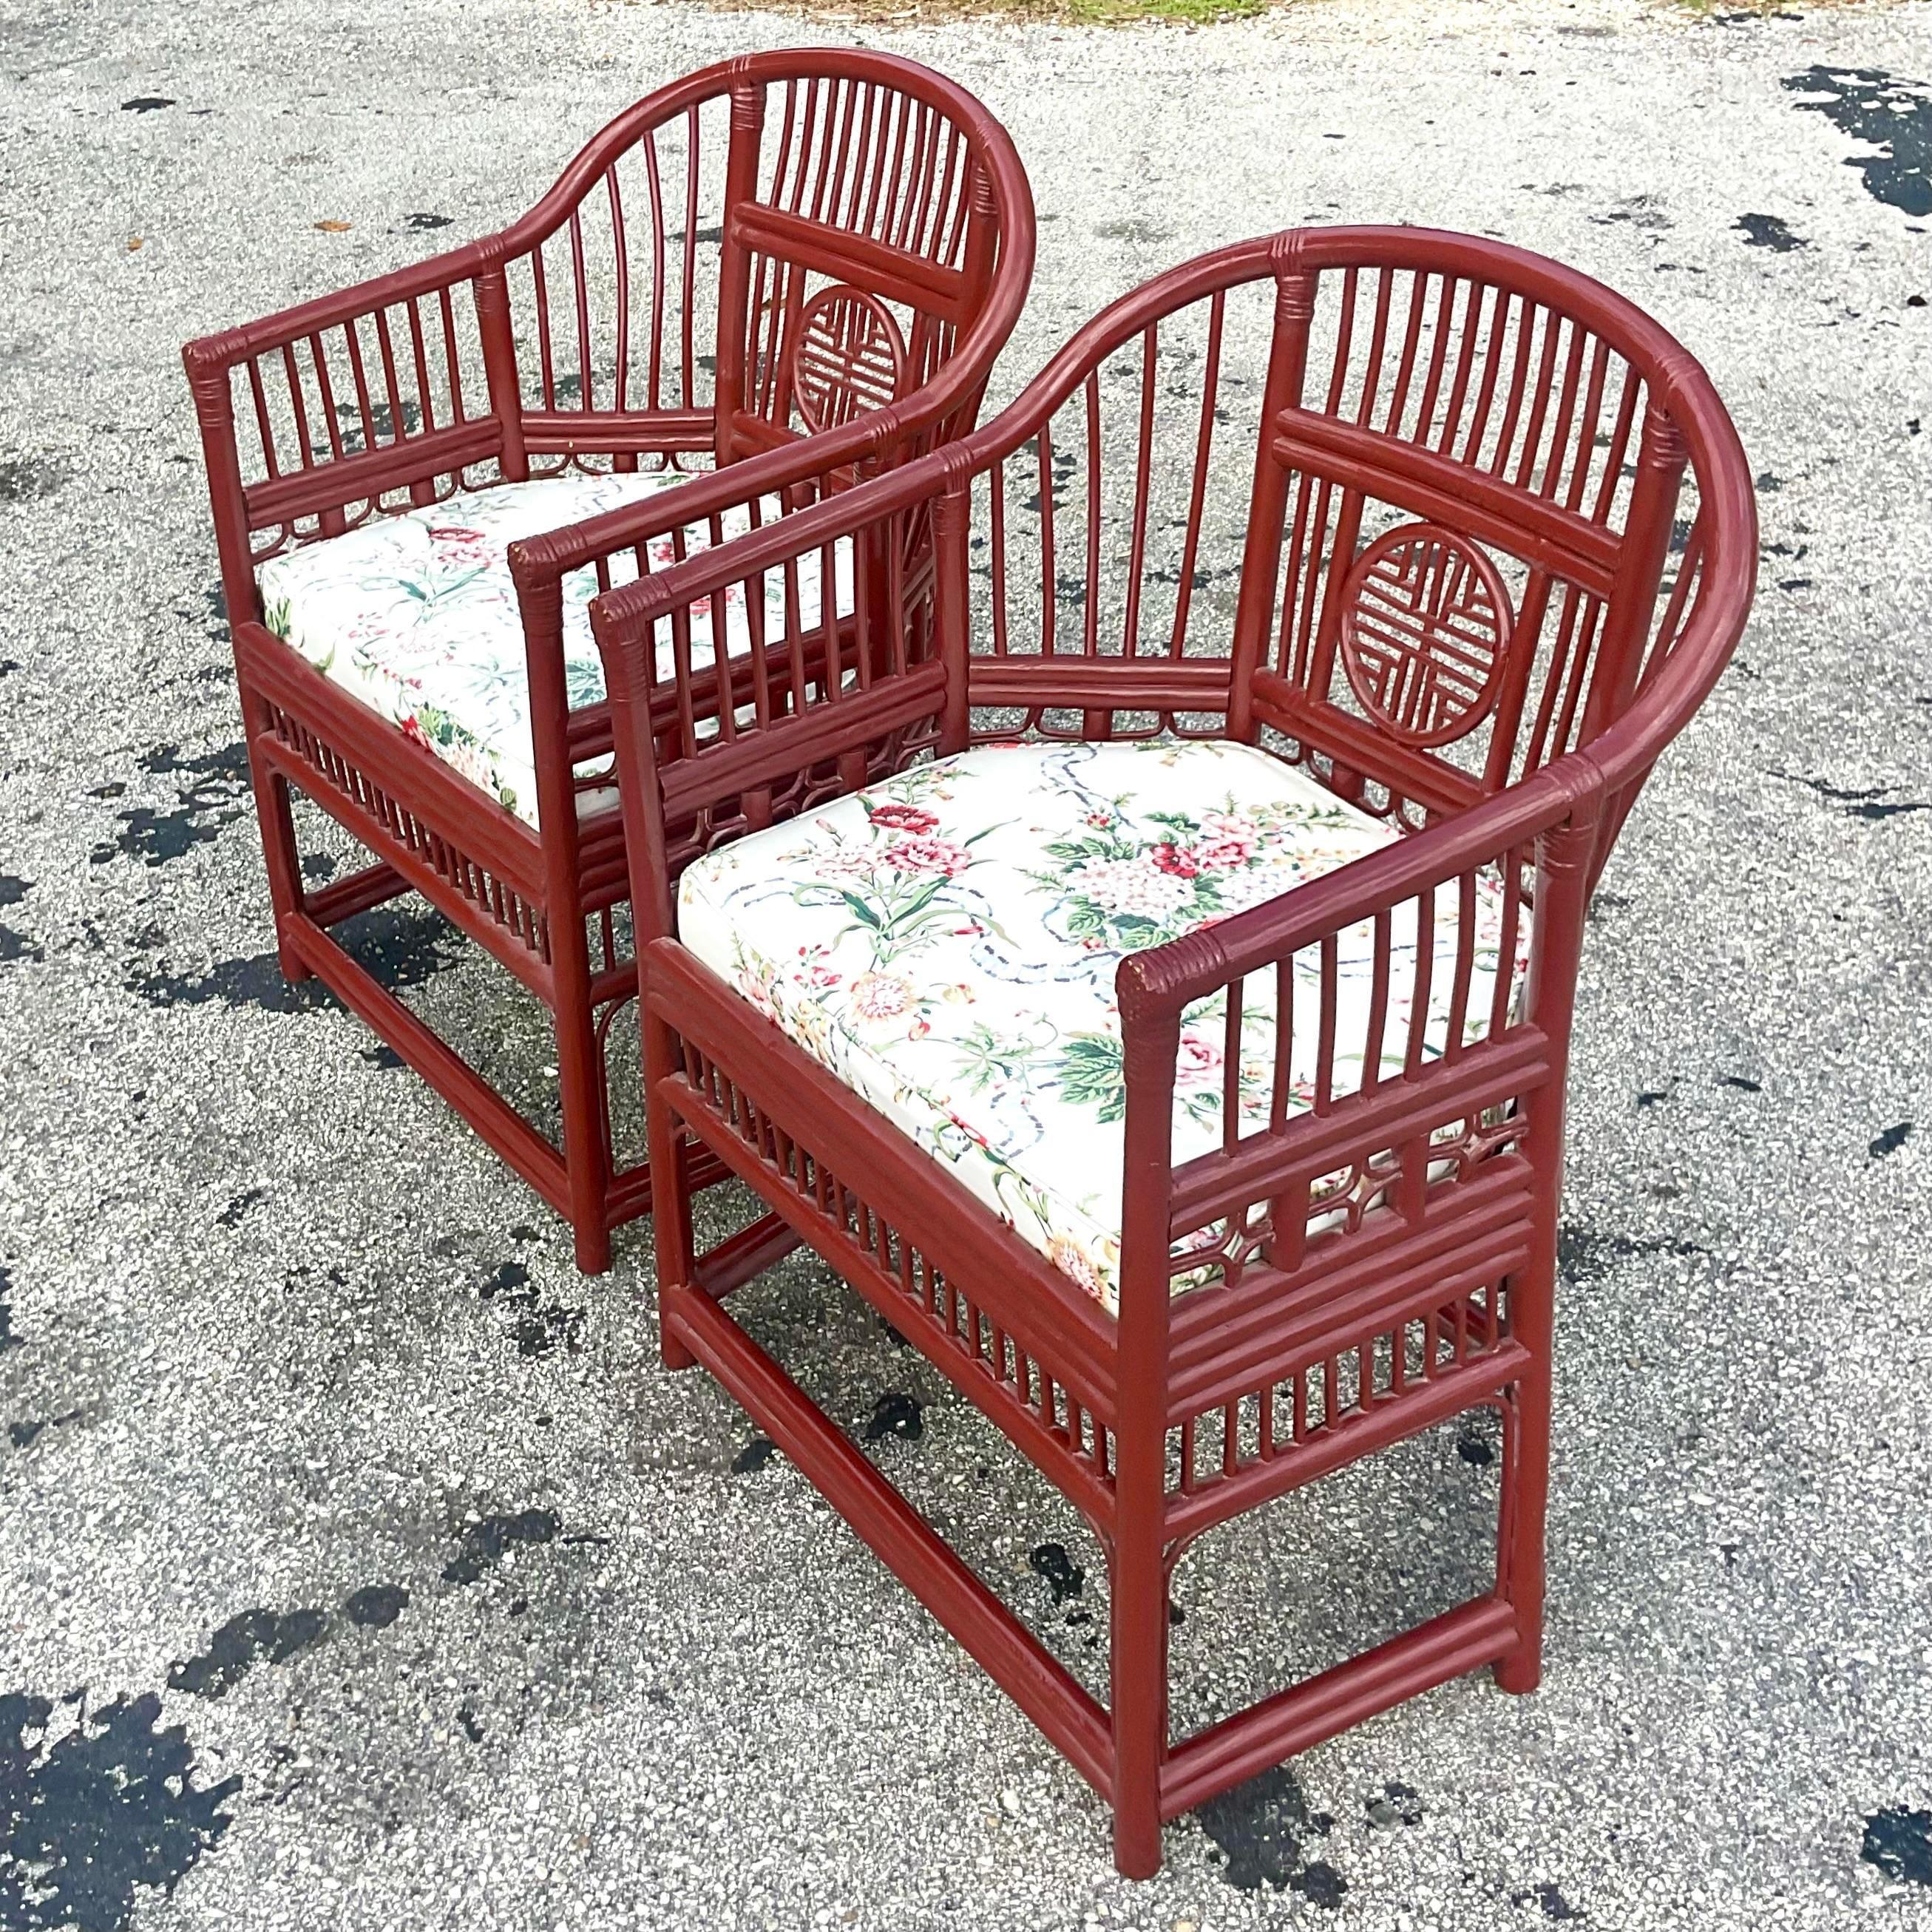 A fabulous pair of vintage Coastal lounge chairs. The classic Brighton Pavilion shape in a wine colored matte lacquered finish. Beautiful floating floral cushions over a rattan seat. Acquired from a Palm Beach estate.